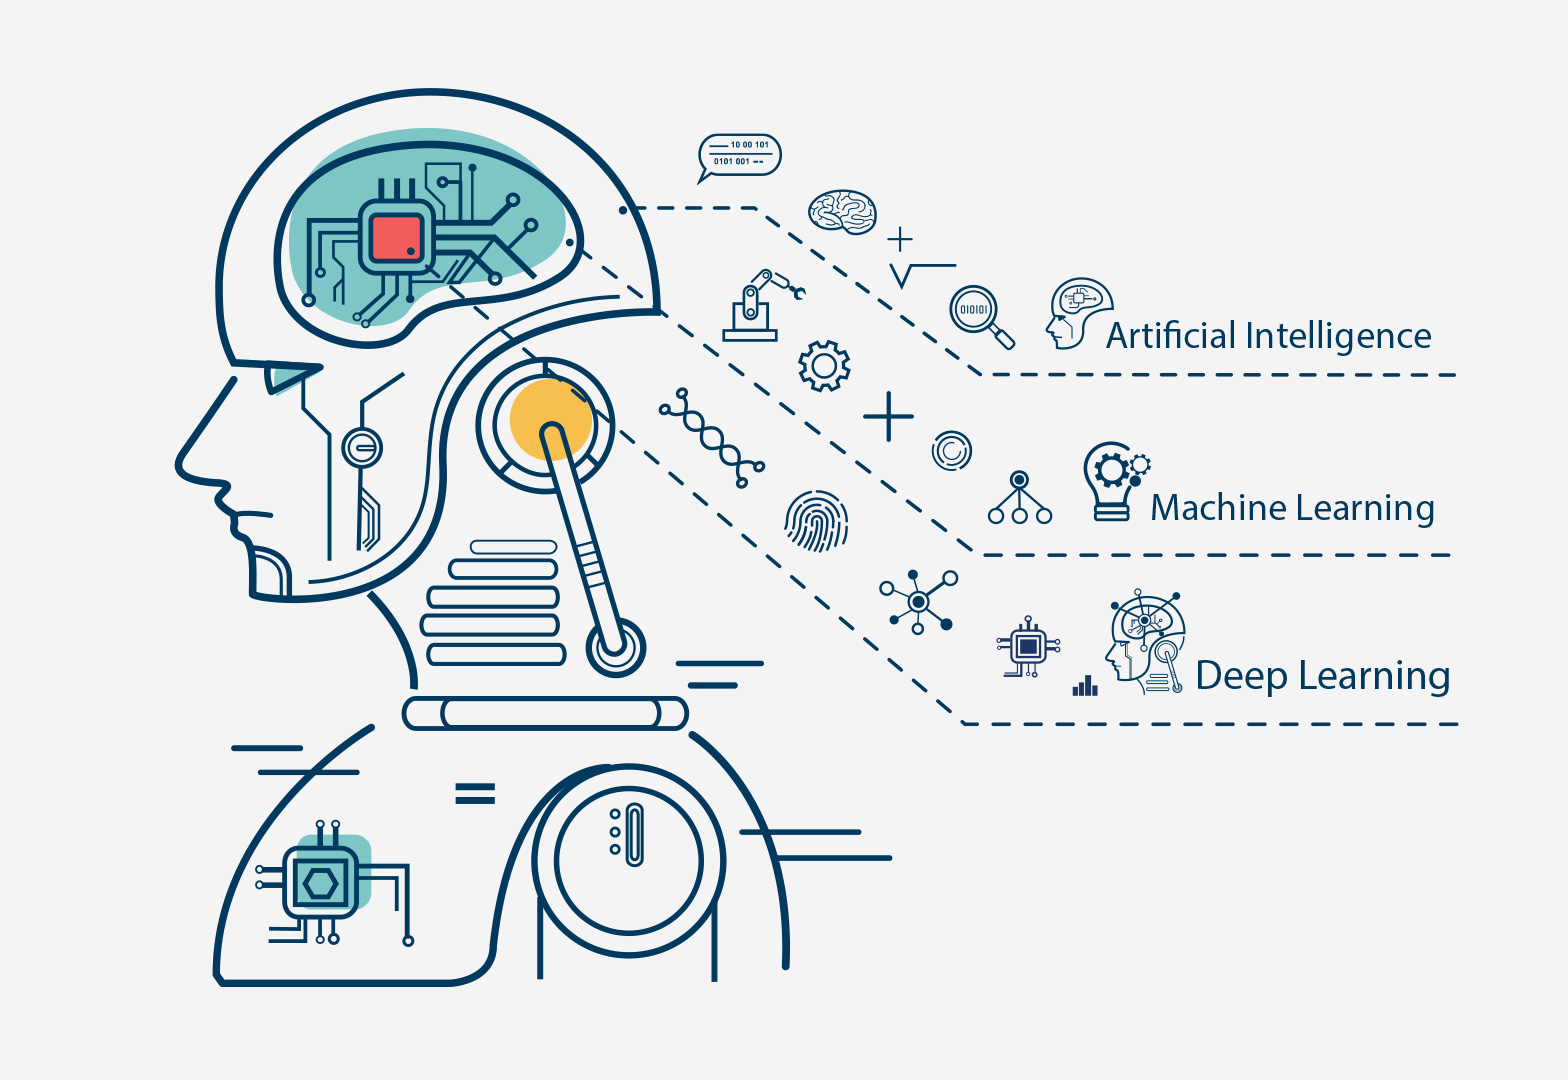 Machine learning overview